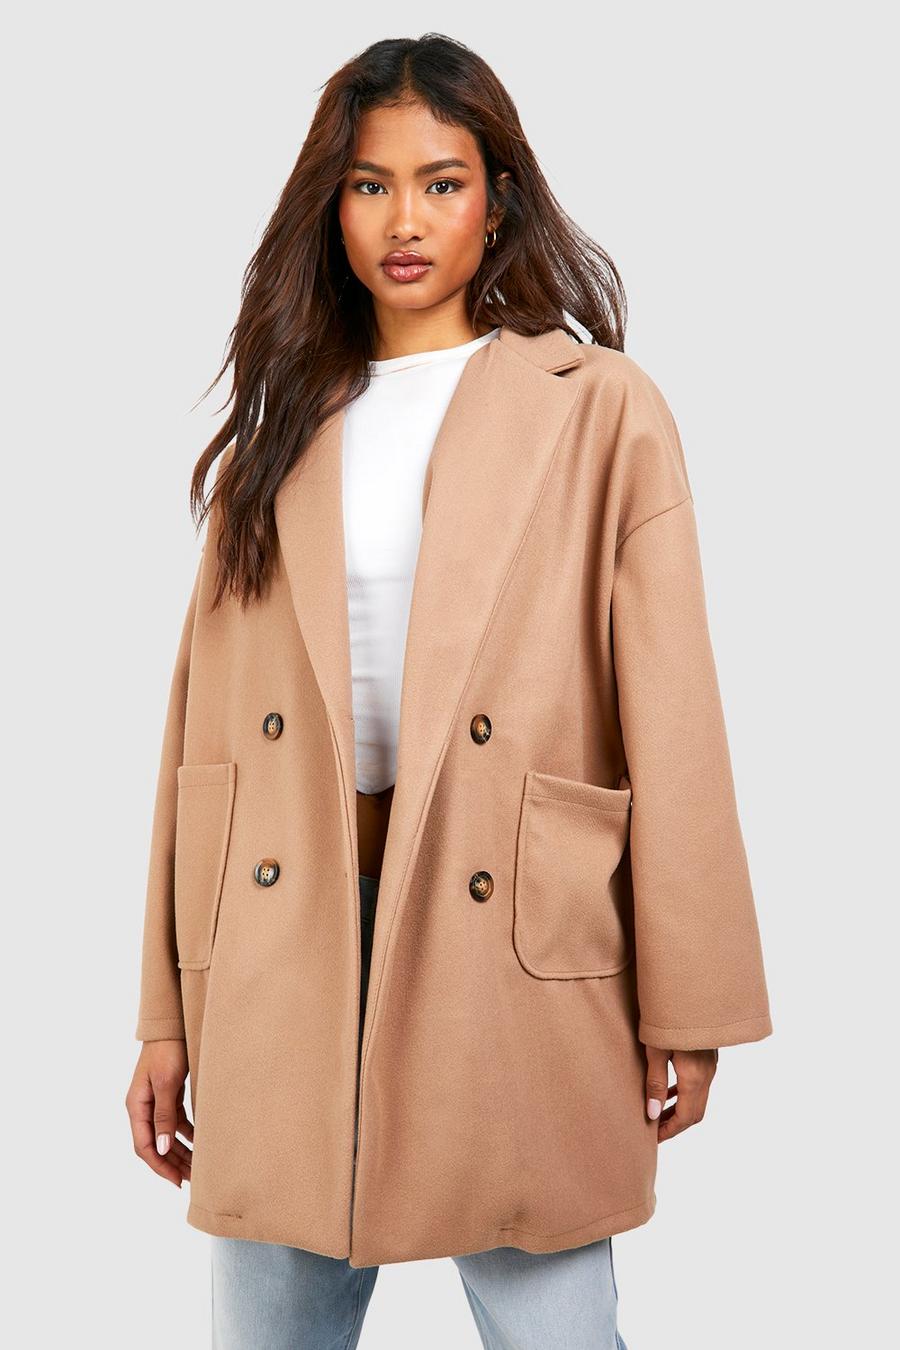 How to style a petite camel oversized wool coat